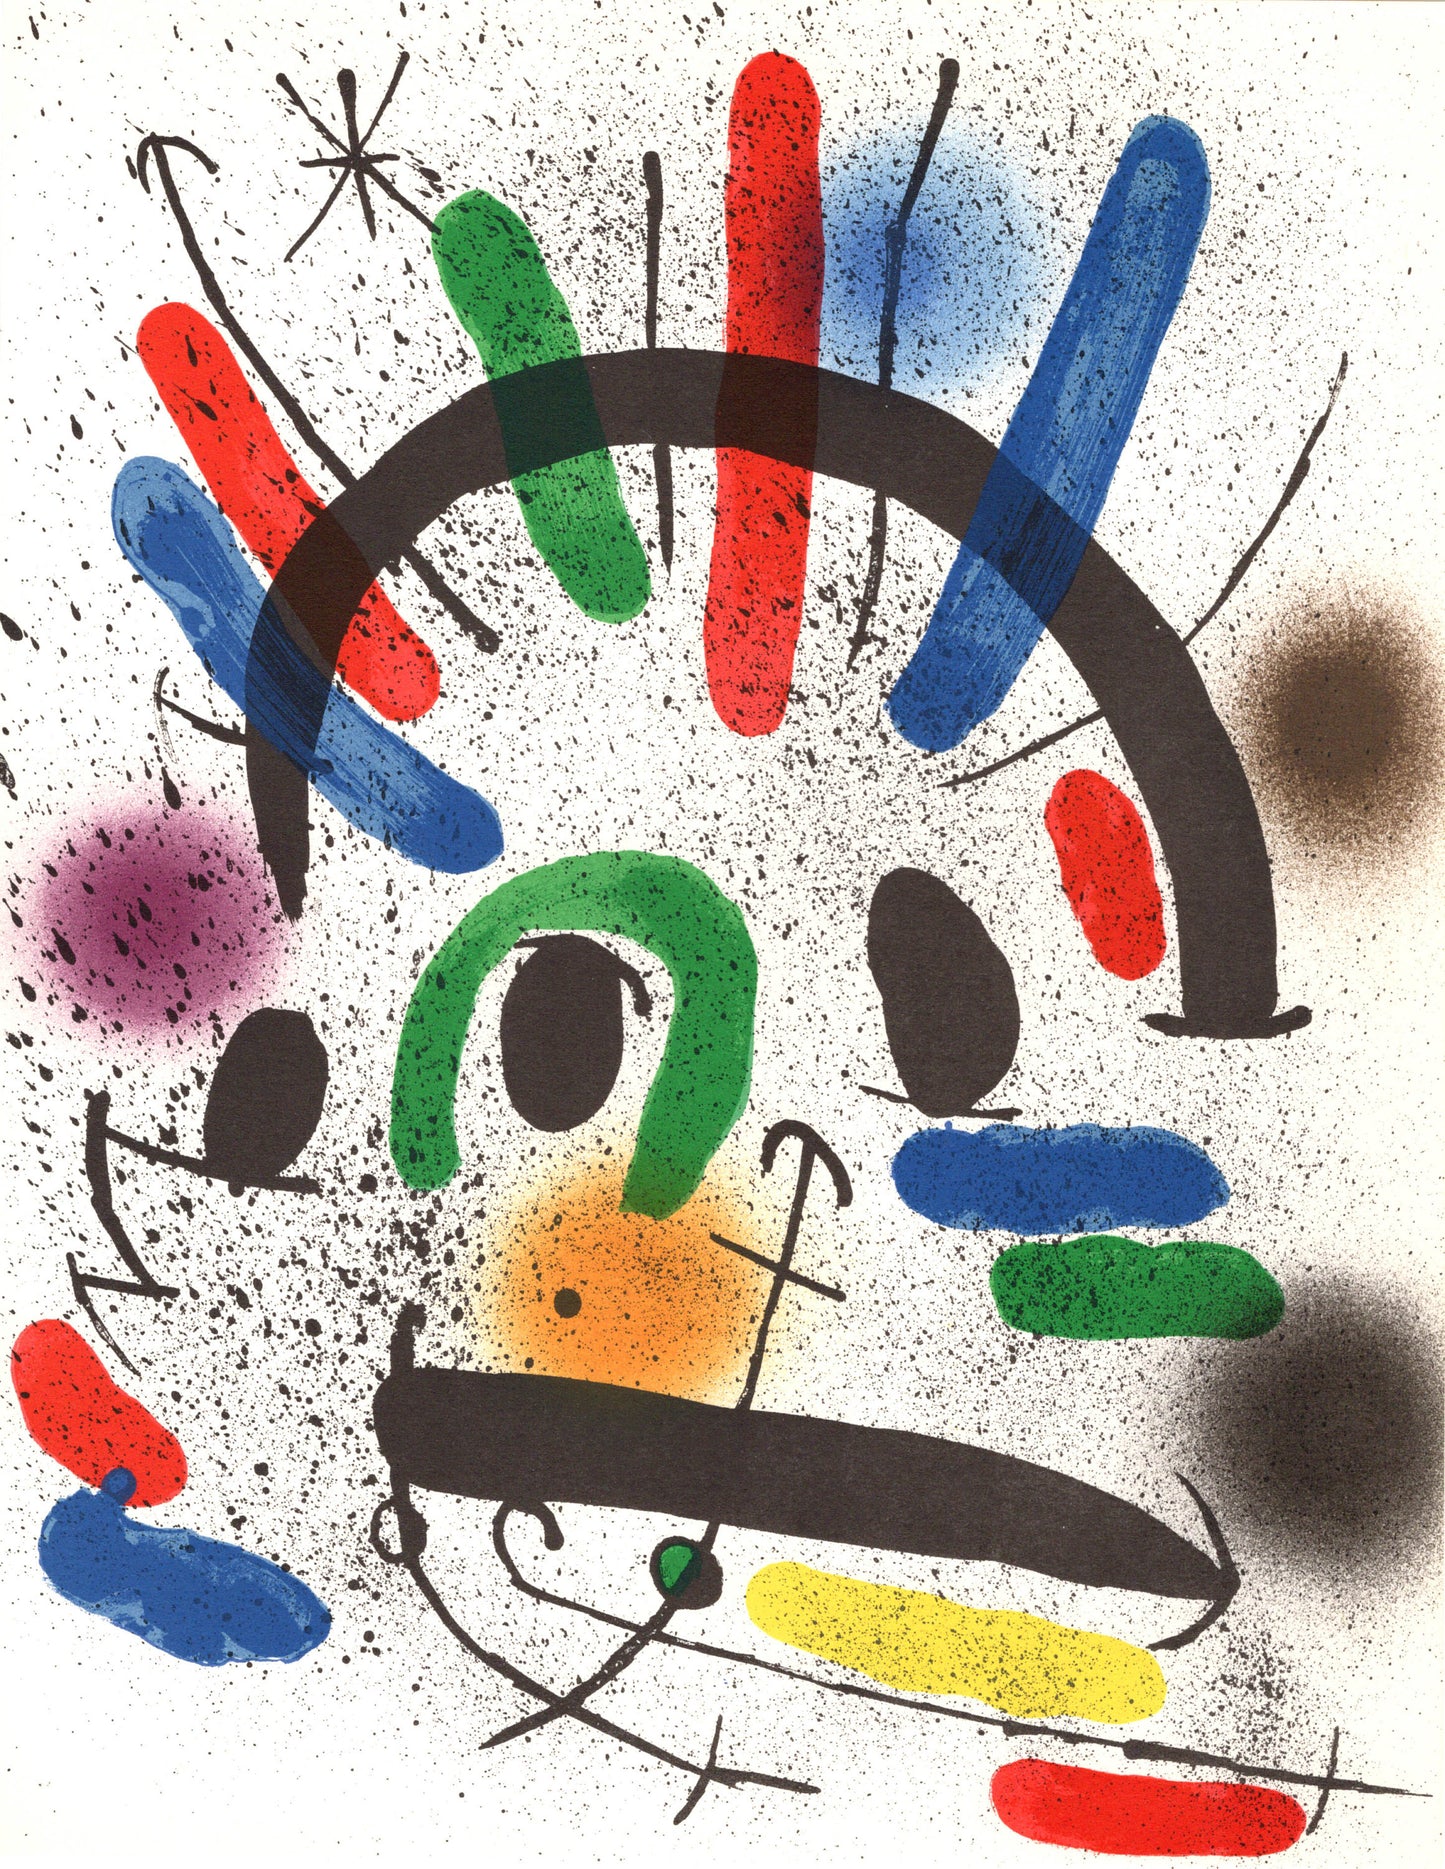 Joan Miro First Run Lithograph Print from Lithographies Volume 1 1972